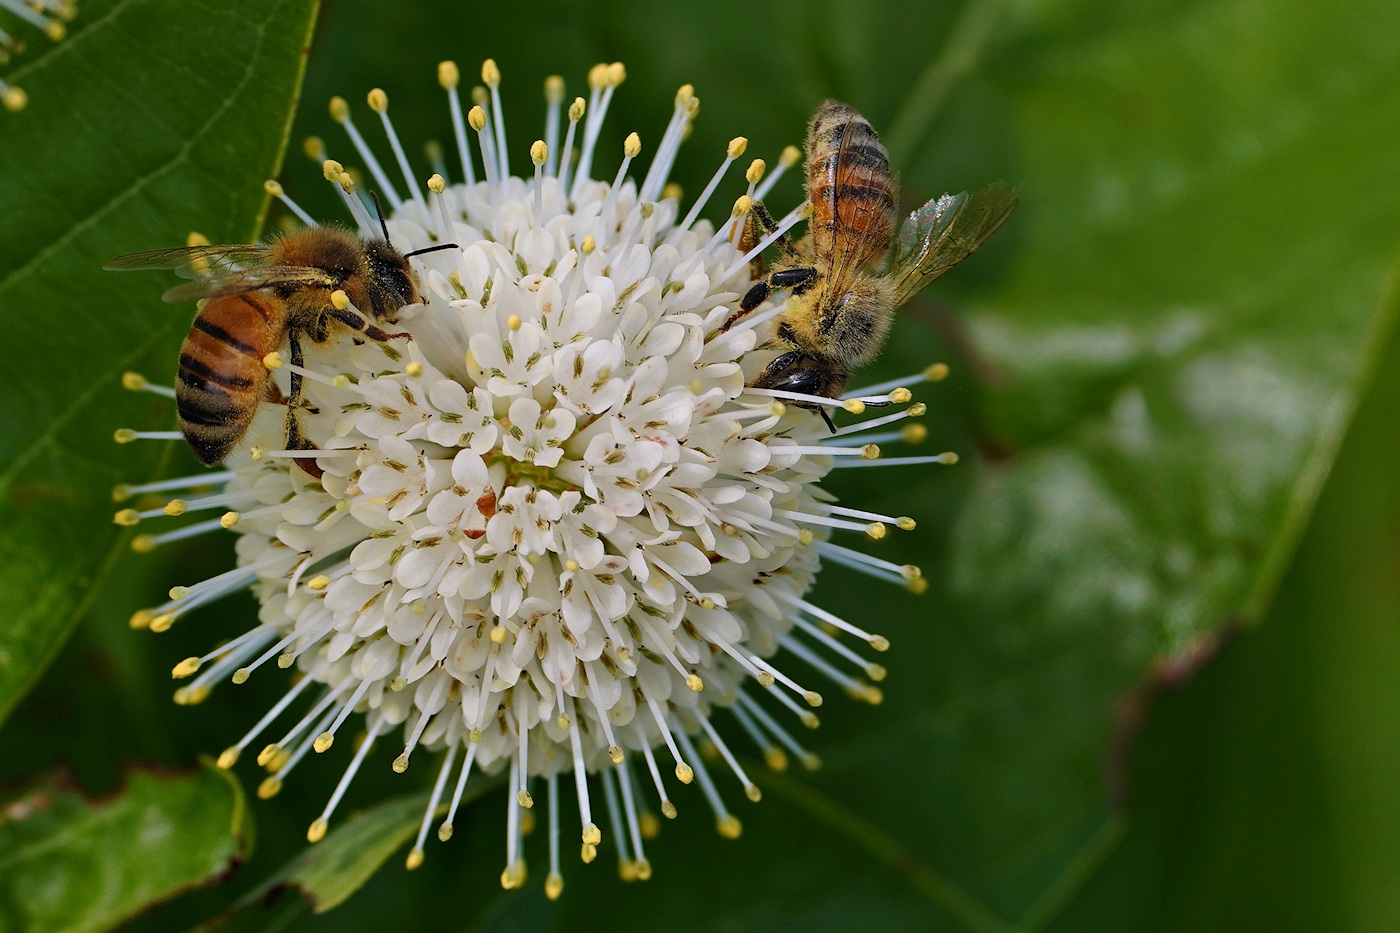 Bees on a flower pod